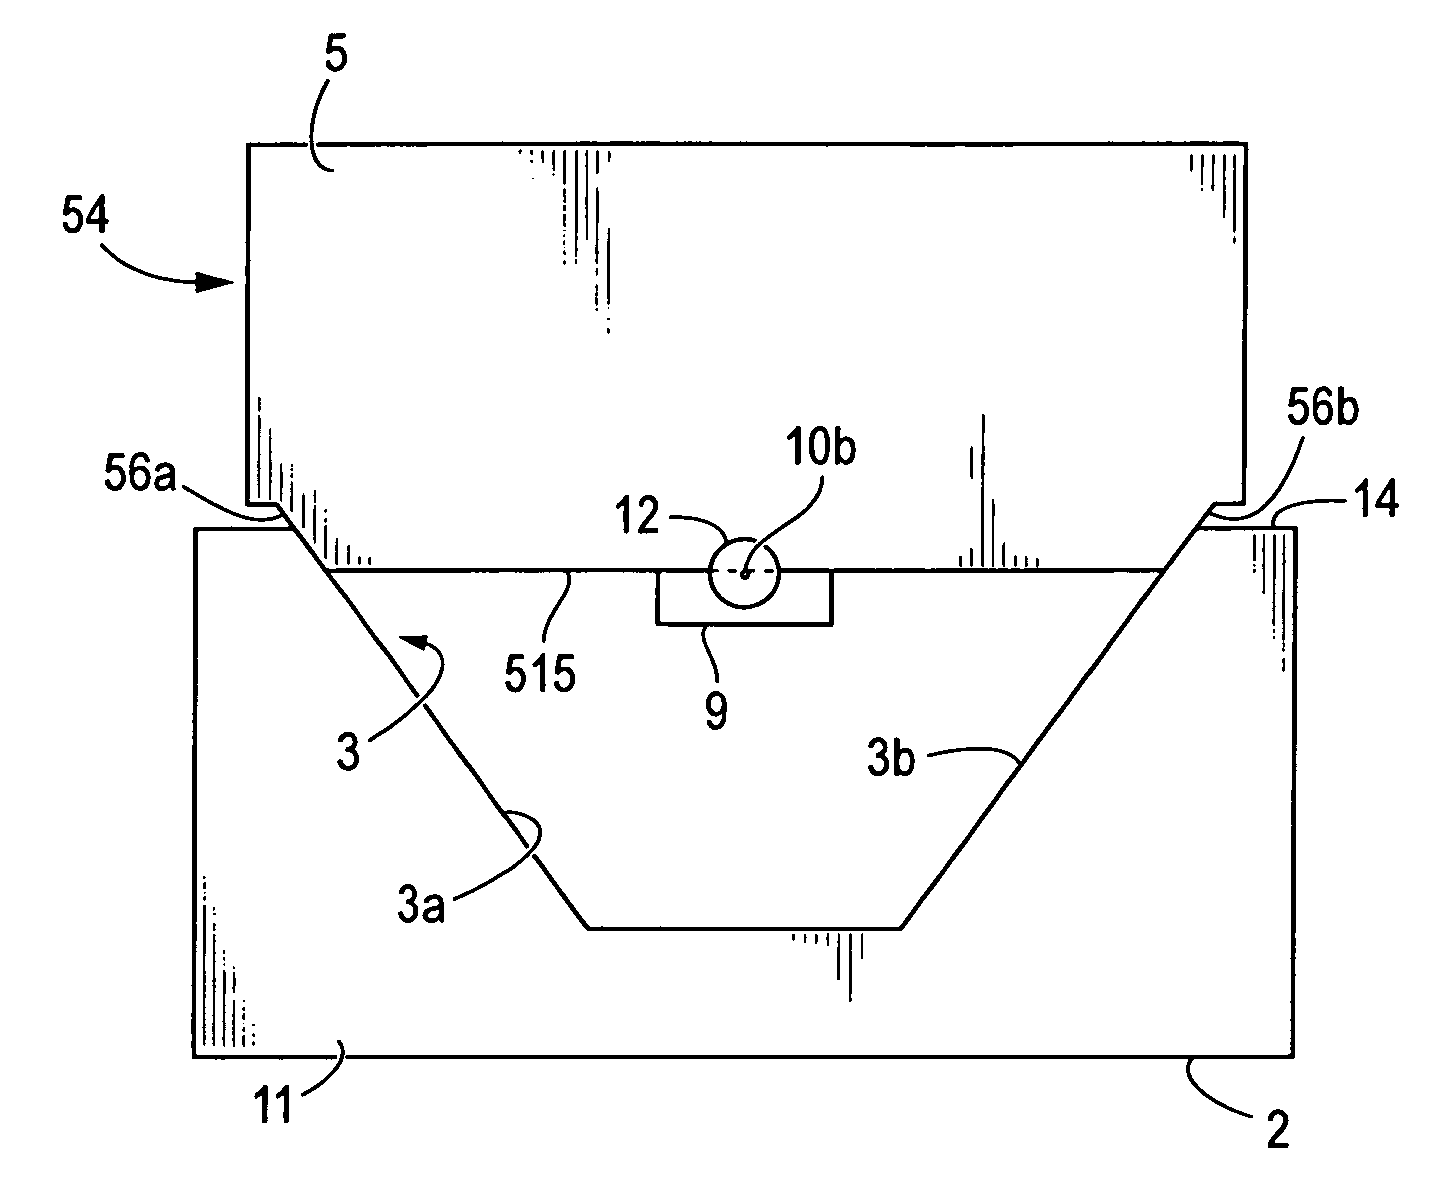 Optical bench having V-groove for aligning optical components